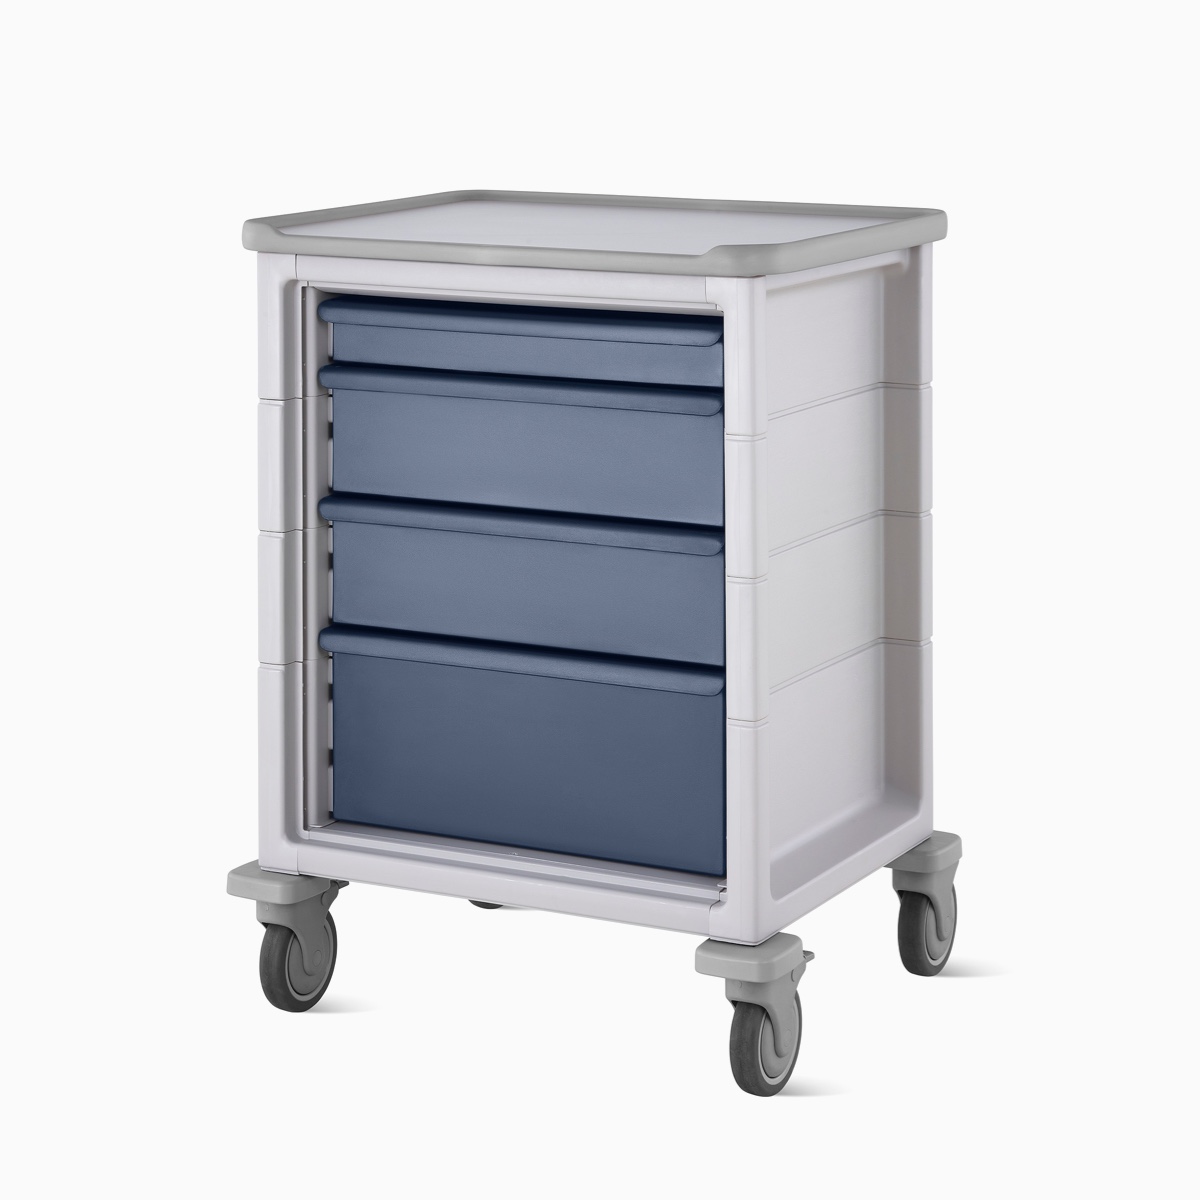 A mobile Procedure and Supply Cart in a light gray body and dark blue drawers.